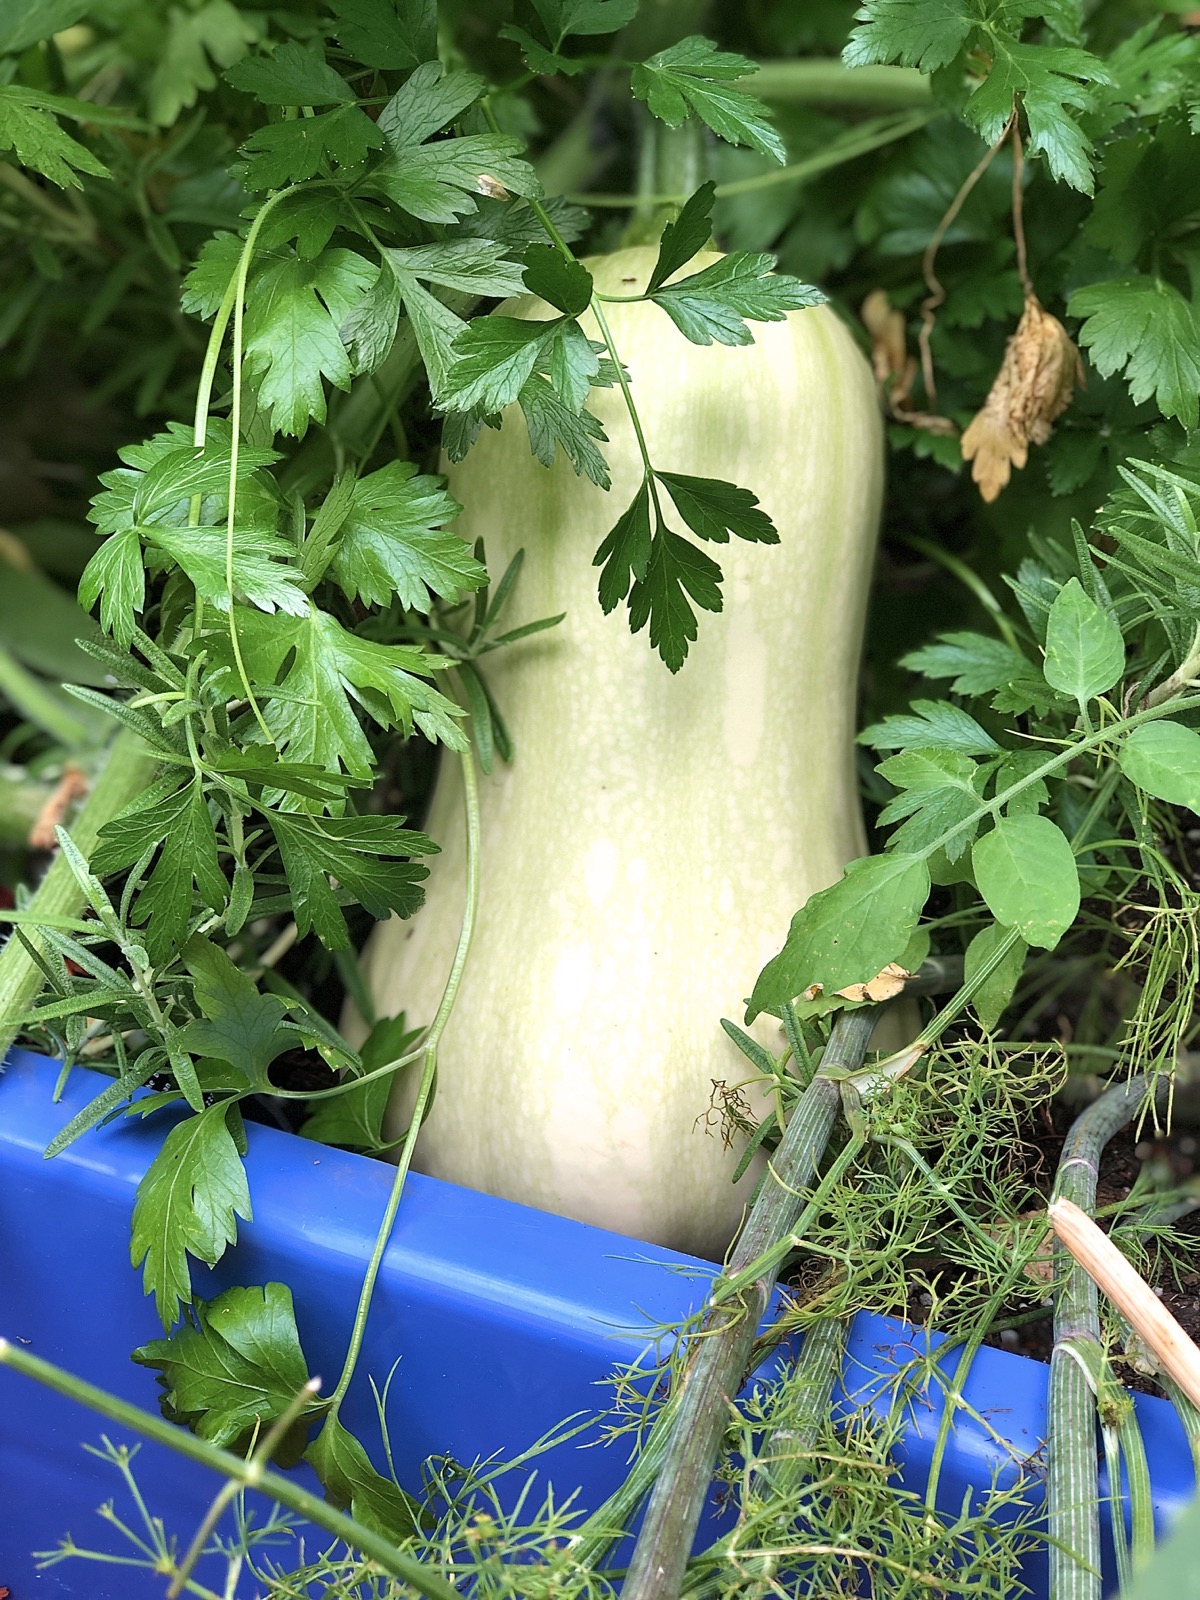 Butternut squash on the vine peeking out from amongst parsley and dill plants.